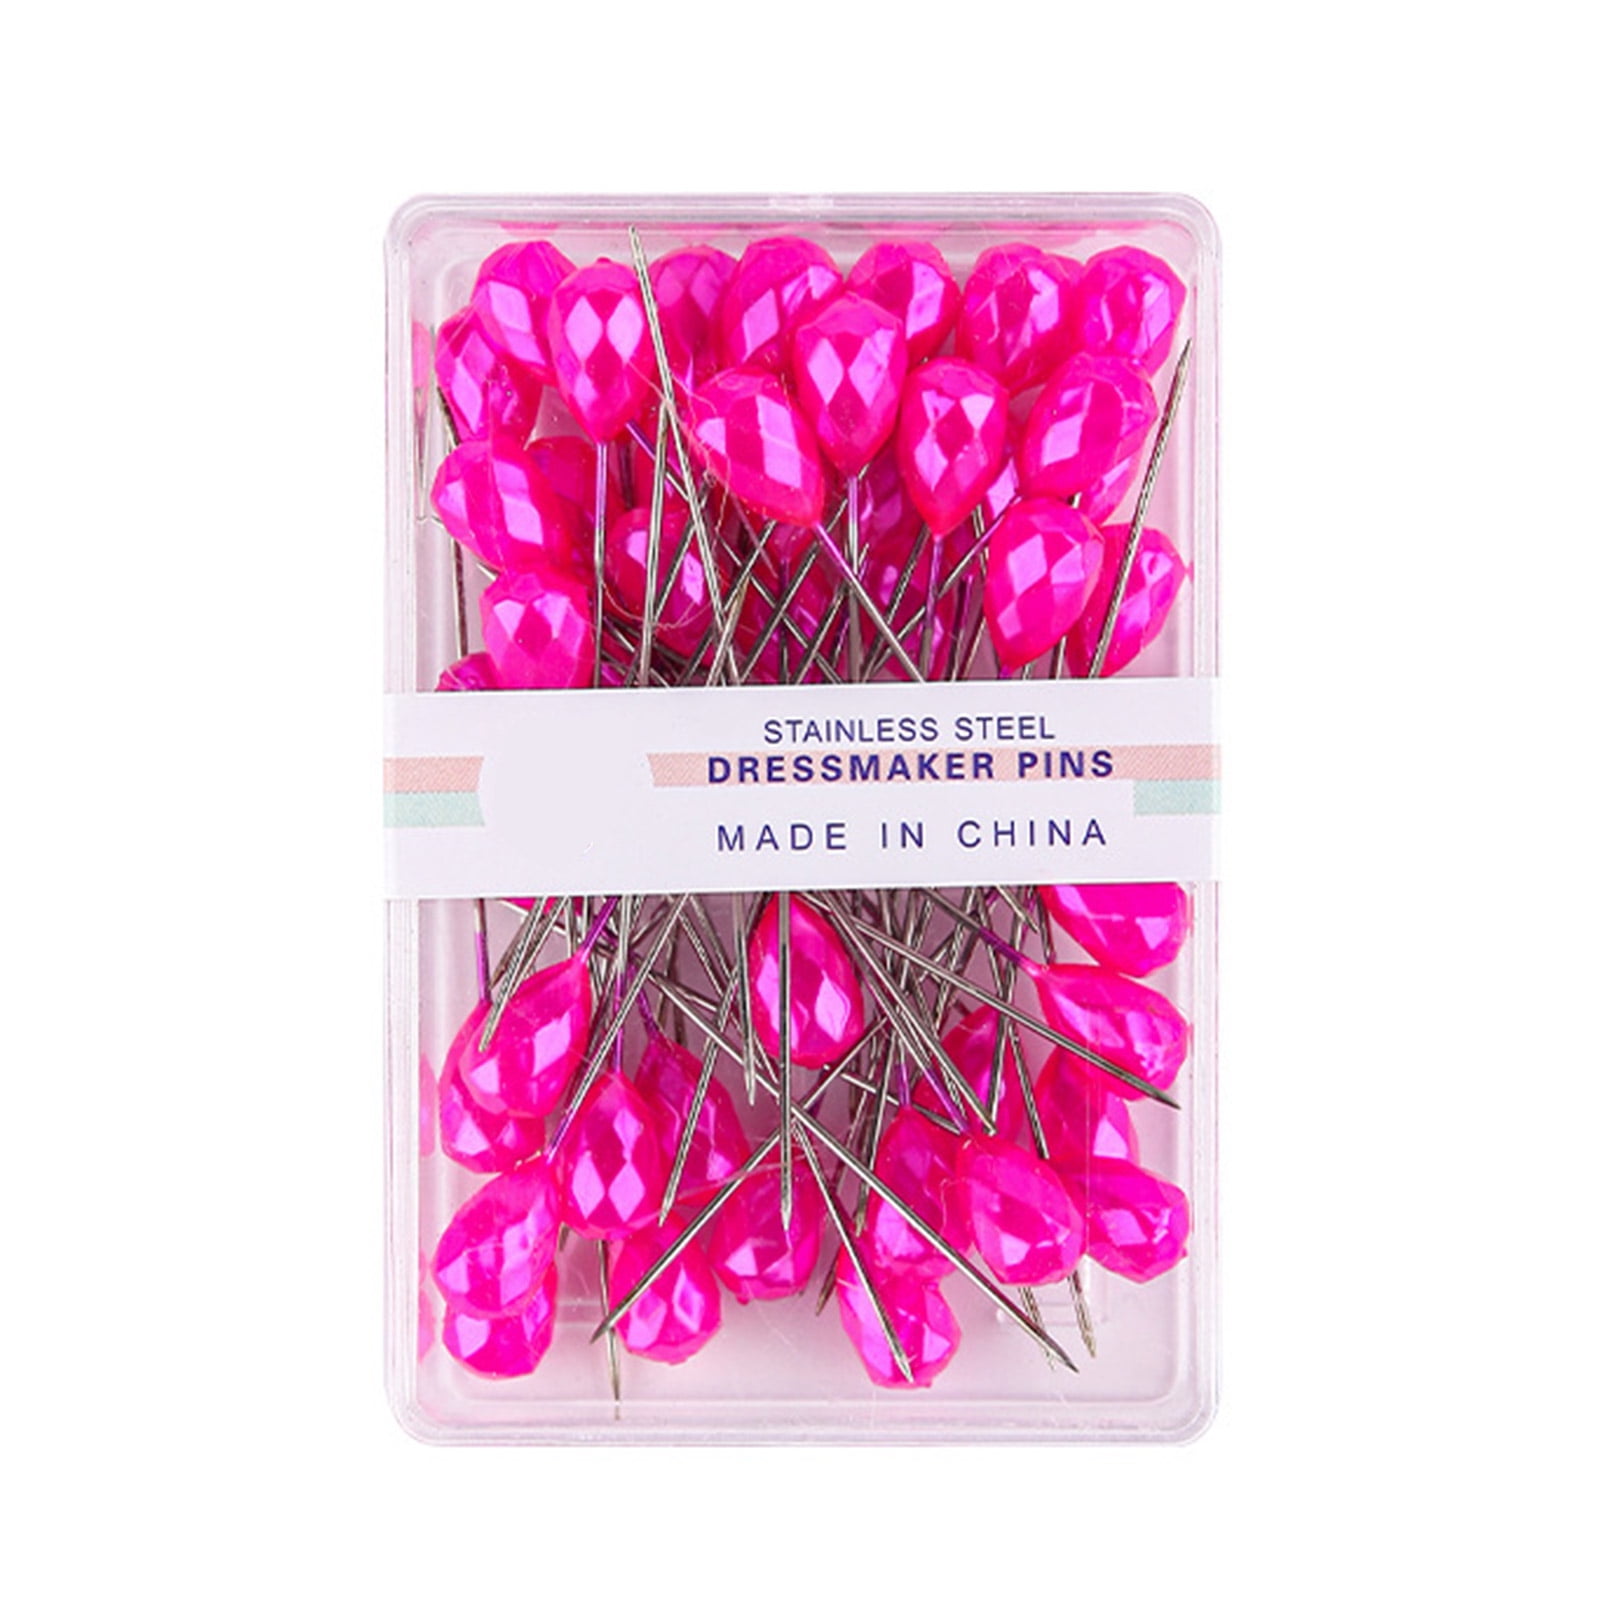 50 Pieces Sewing Pins 2 Inch Straight Pins for Fabric Clothing Design ...